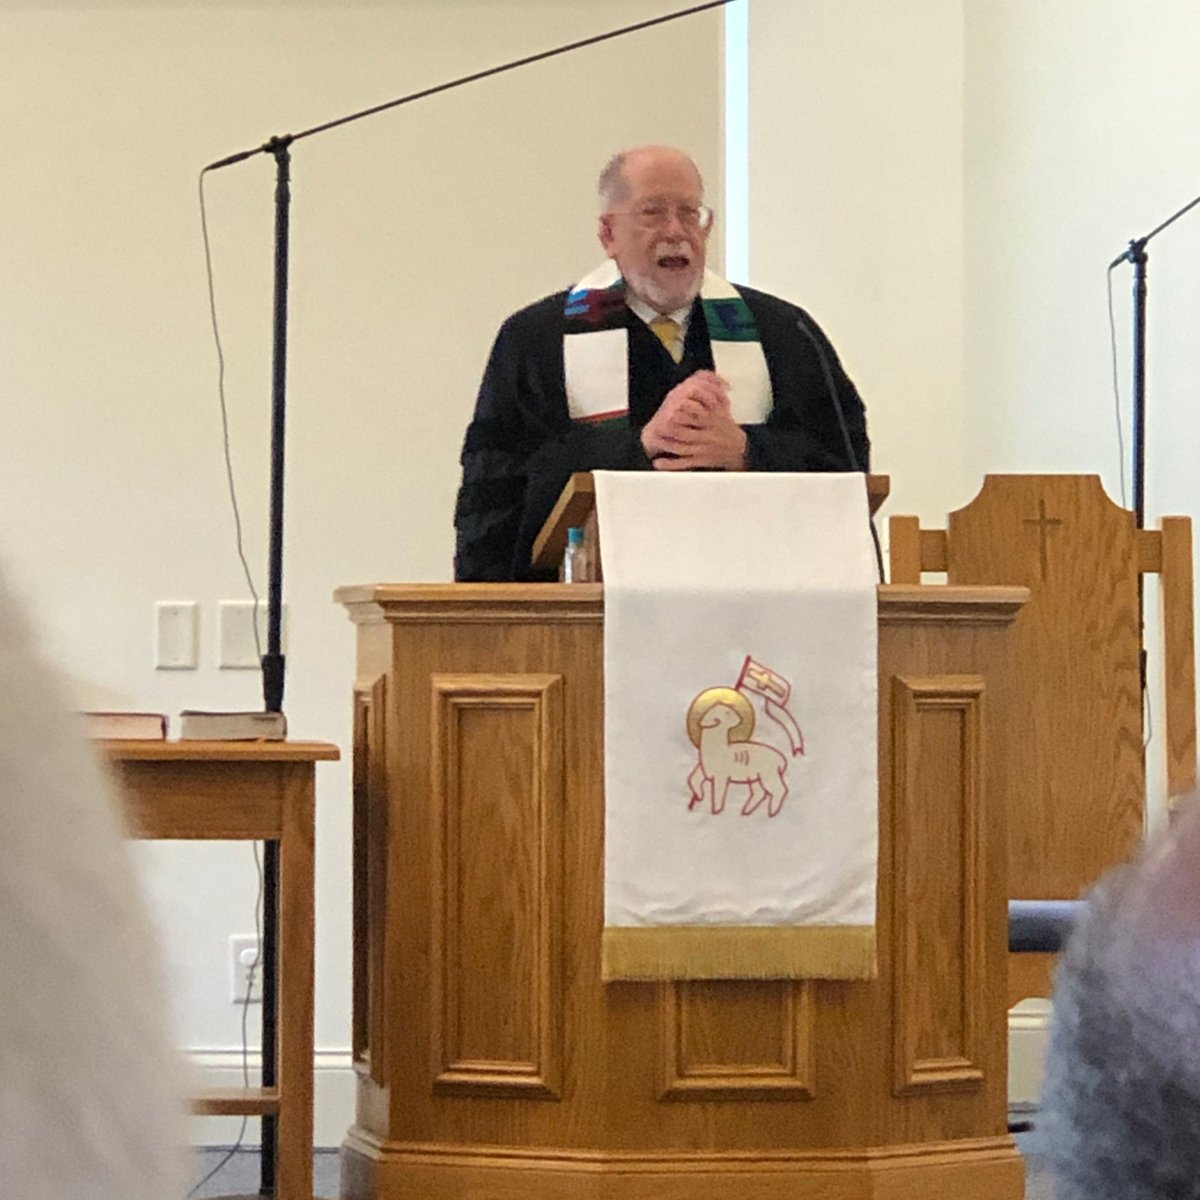 Northside United Methodist Church invited Rev. John Terry, Housing Assistance's homeless outreach worker, to give a sermon. We thank Northside United Methodist Church for the invitation and their Walk for Hope team's outstanding efforts! 

#housingassistance #walkforhope